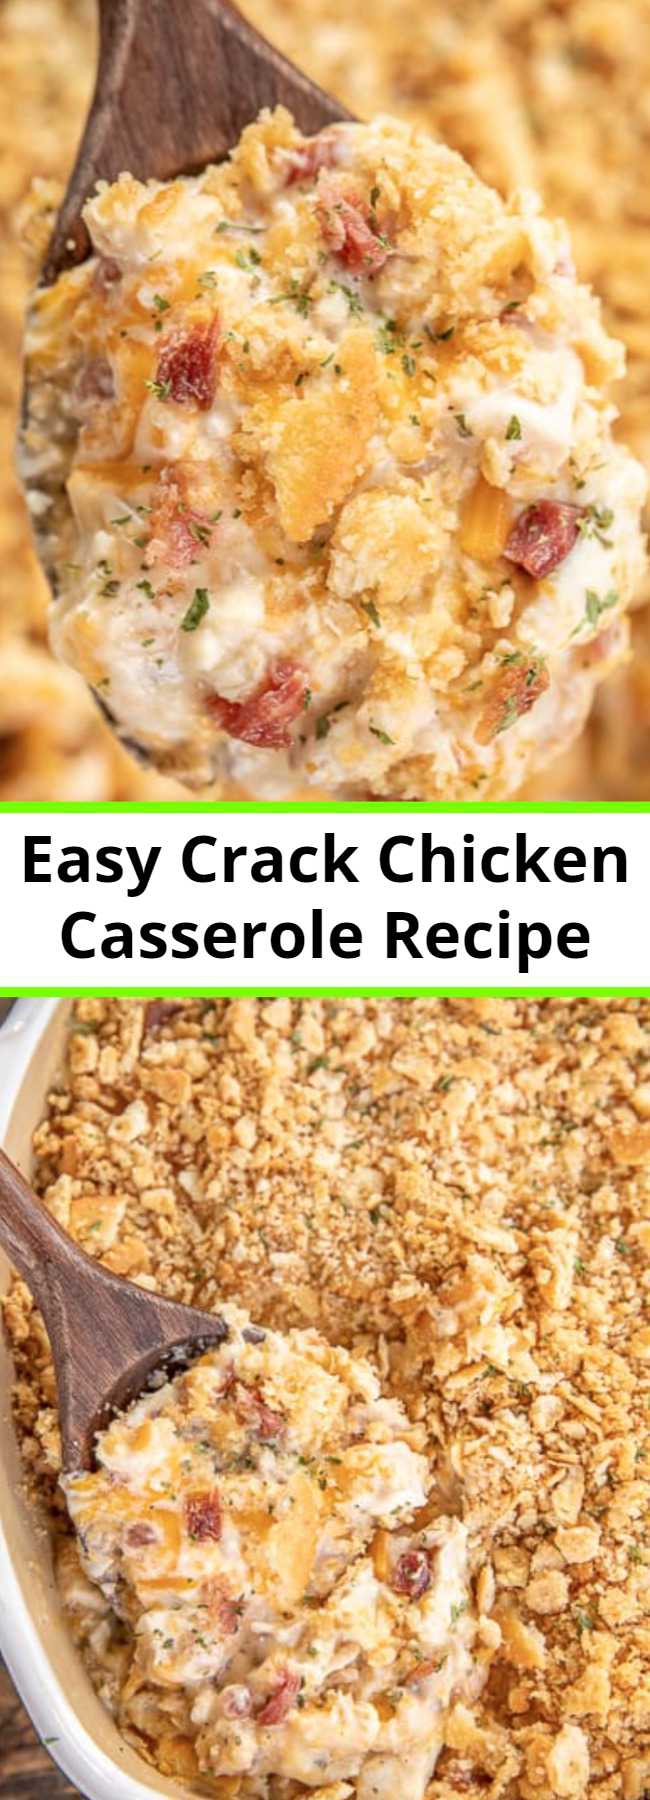 Easy Crack Chicken Casserole Recipe - Creamy chicken casserole loaded with cheddar, bacon and ranch. Use a rotisserie chicken for easy prep! Chicken, cheddar, bacon, ranch seasoning, sour cream, cream of chicken soup. The whole family LOVED this easy chicken casserole. It is already on the menu again this week! #chicken #casserole #chickencasserole